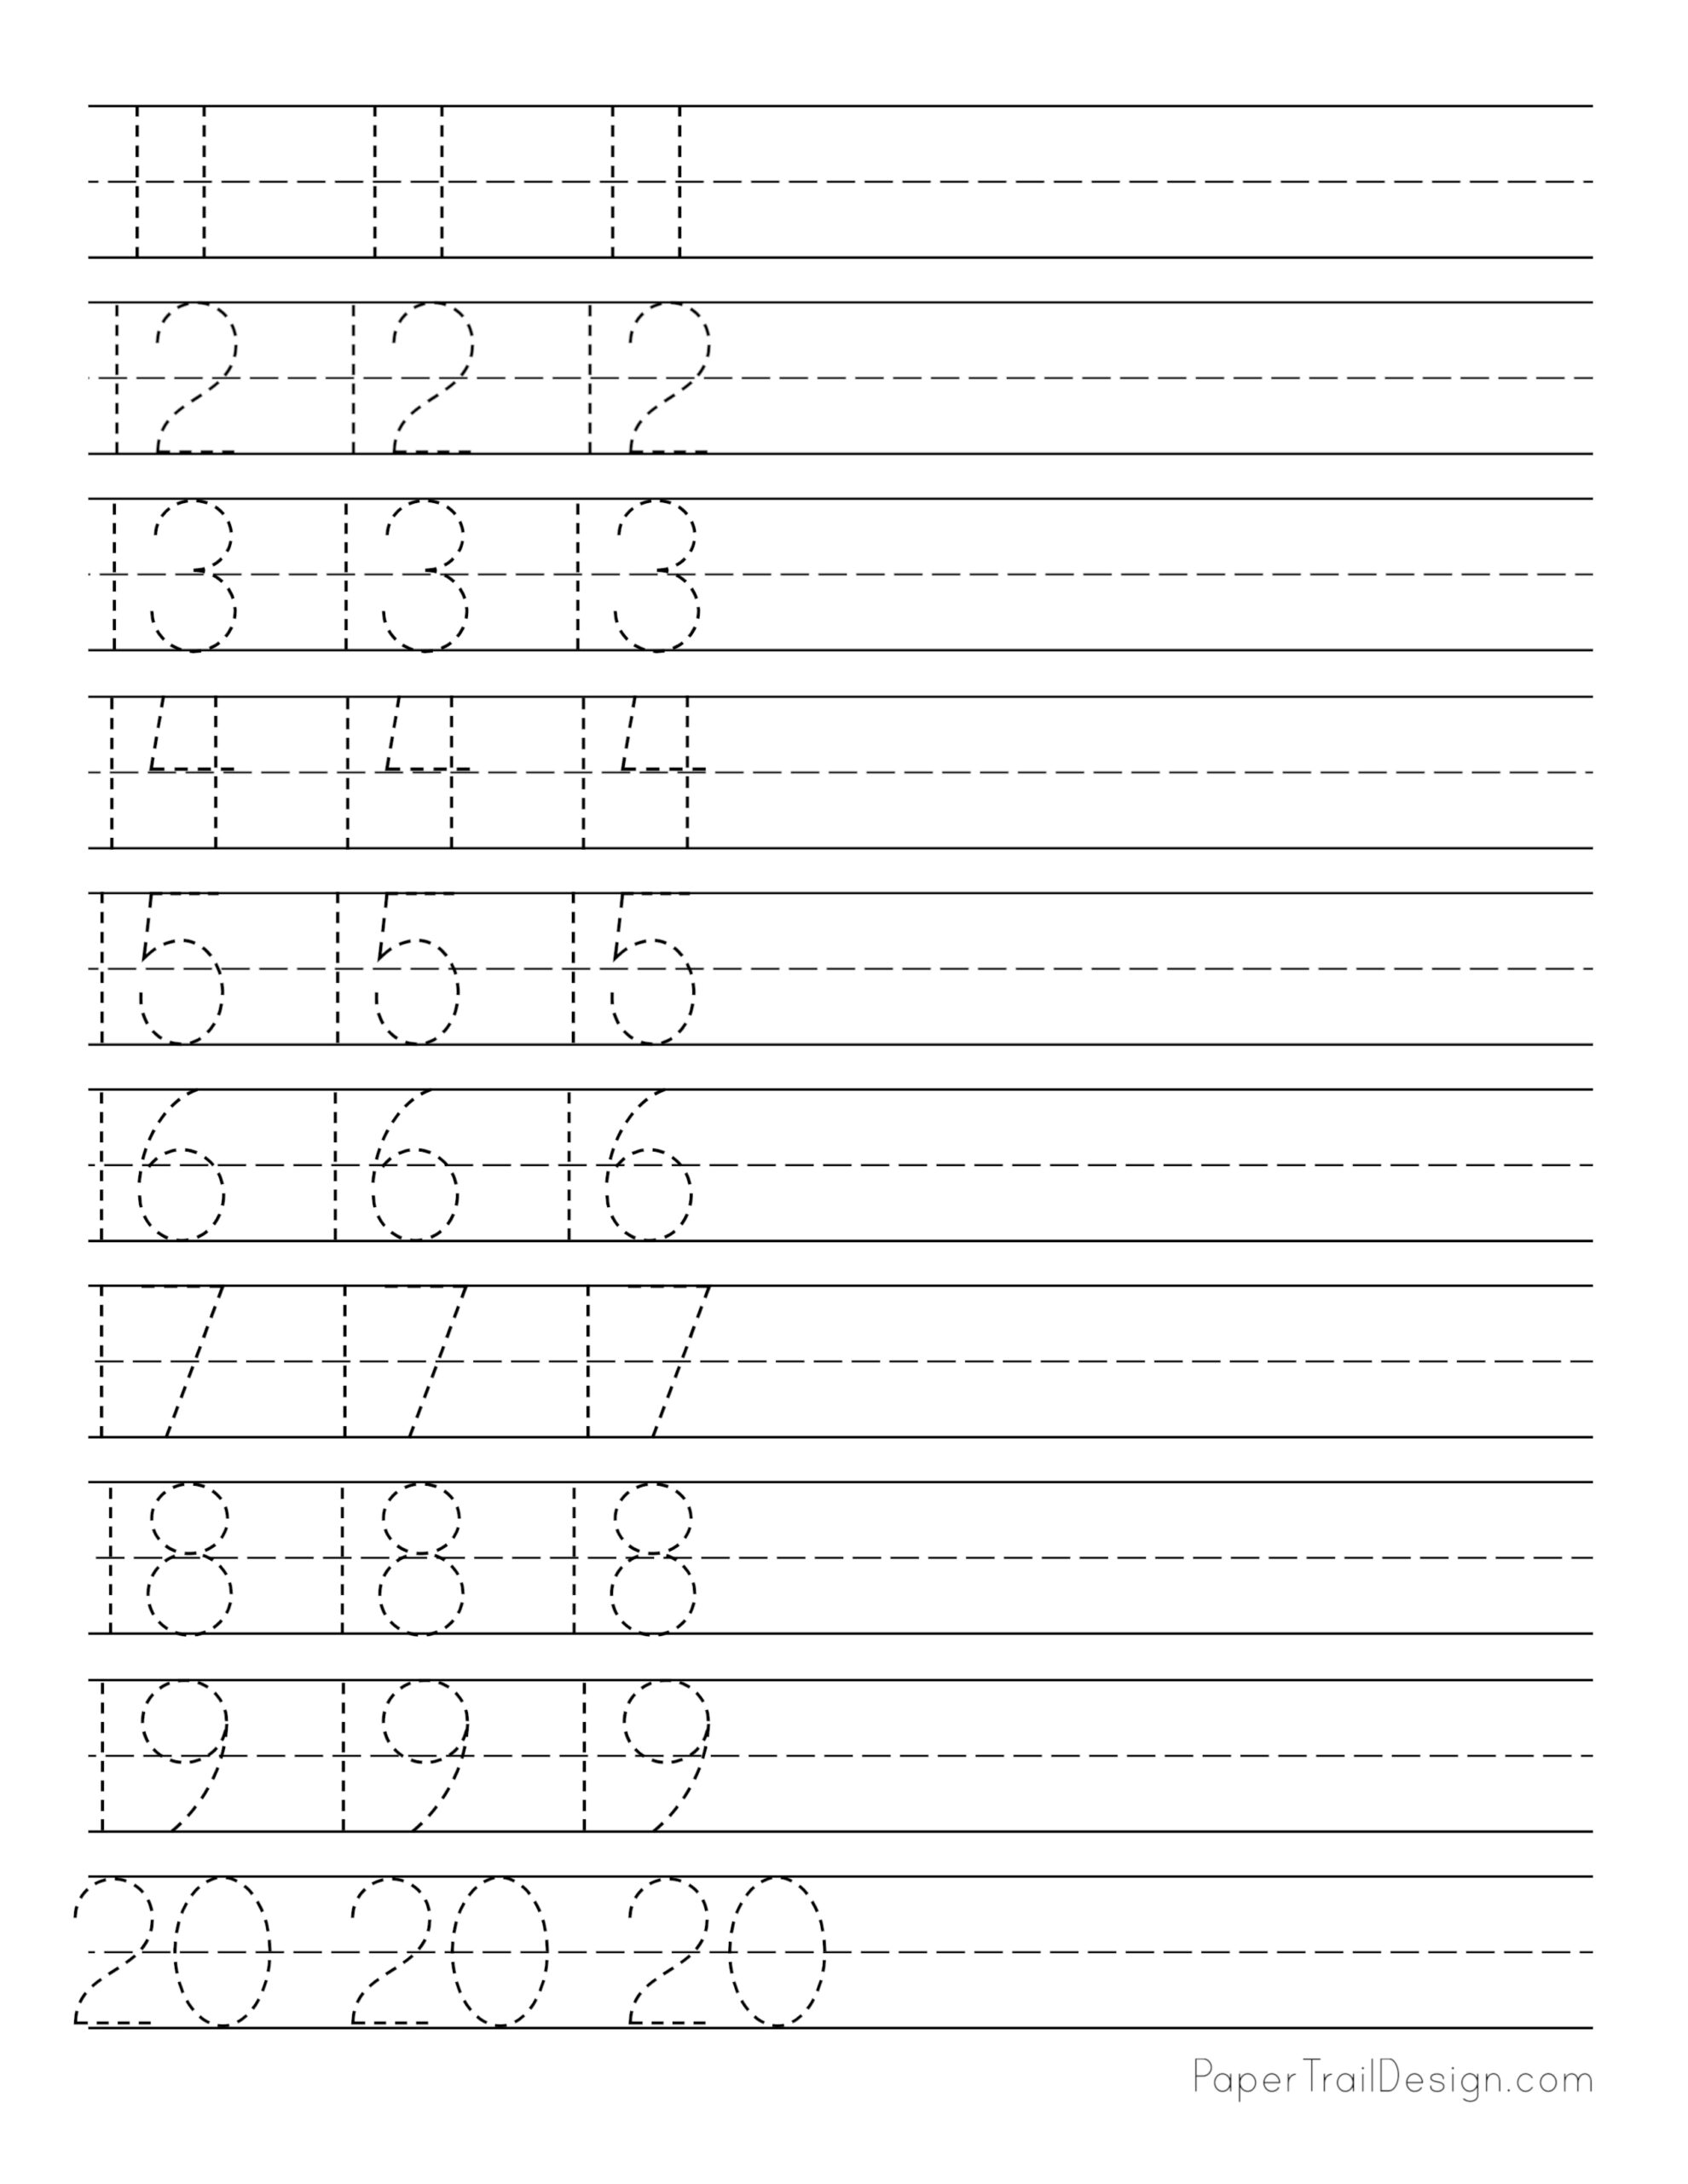 free-number-tracing-worksheets-paper-trail-design